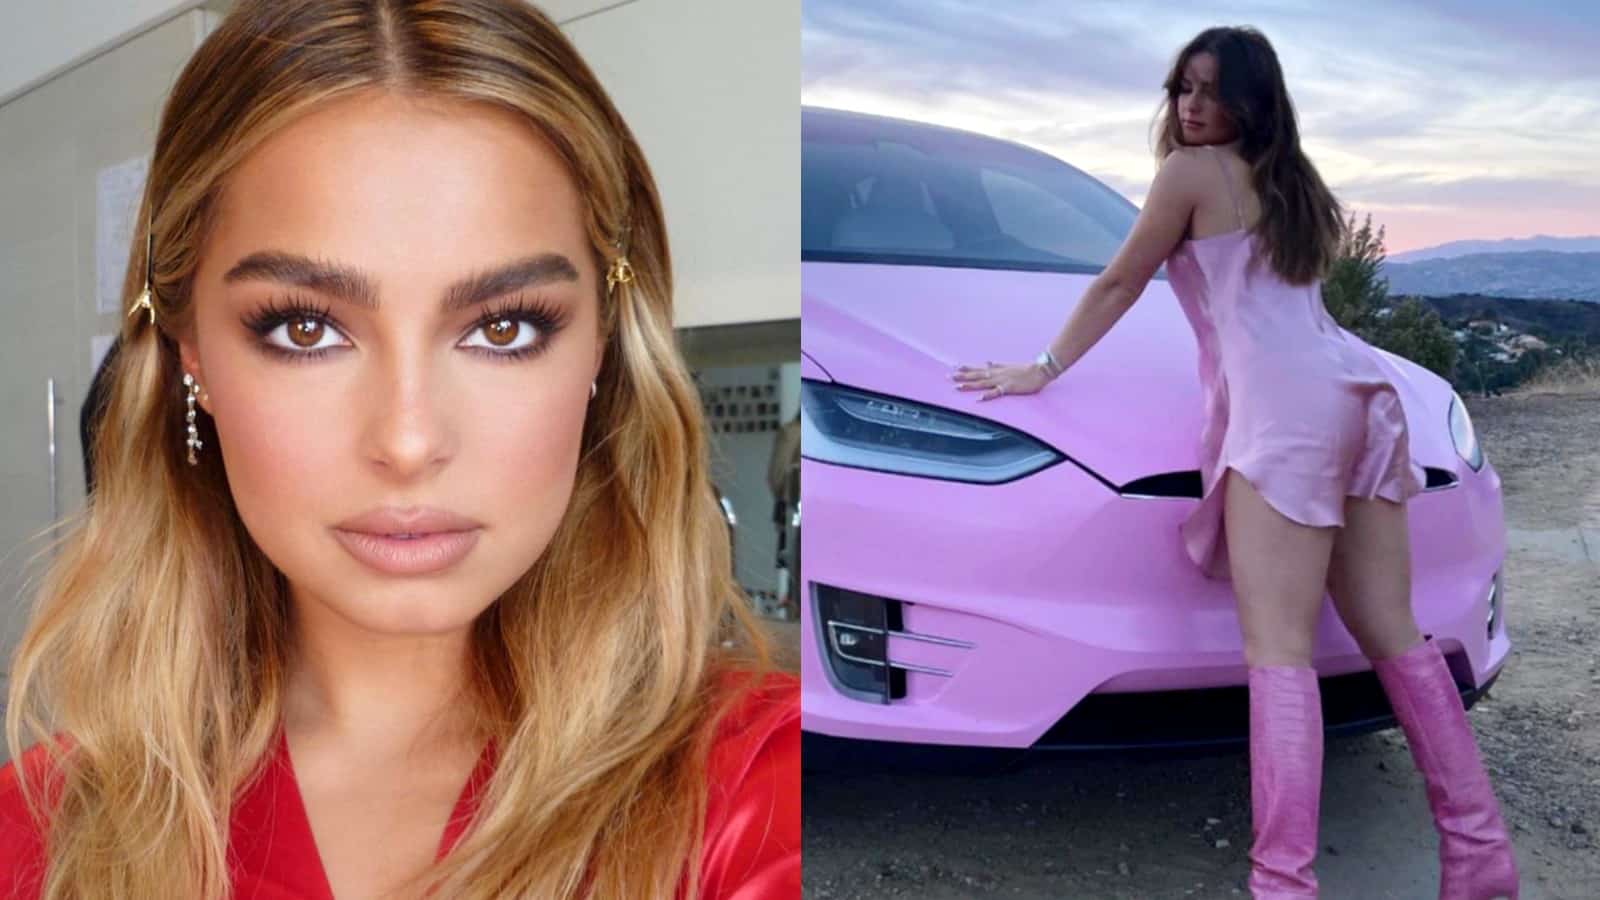 Addison Rae next to image of her leaning on her pink Tesla